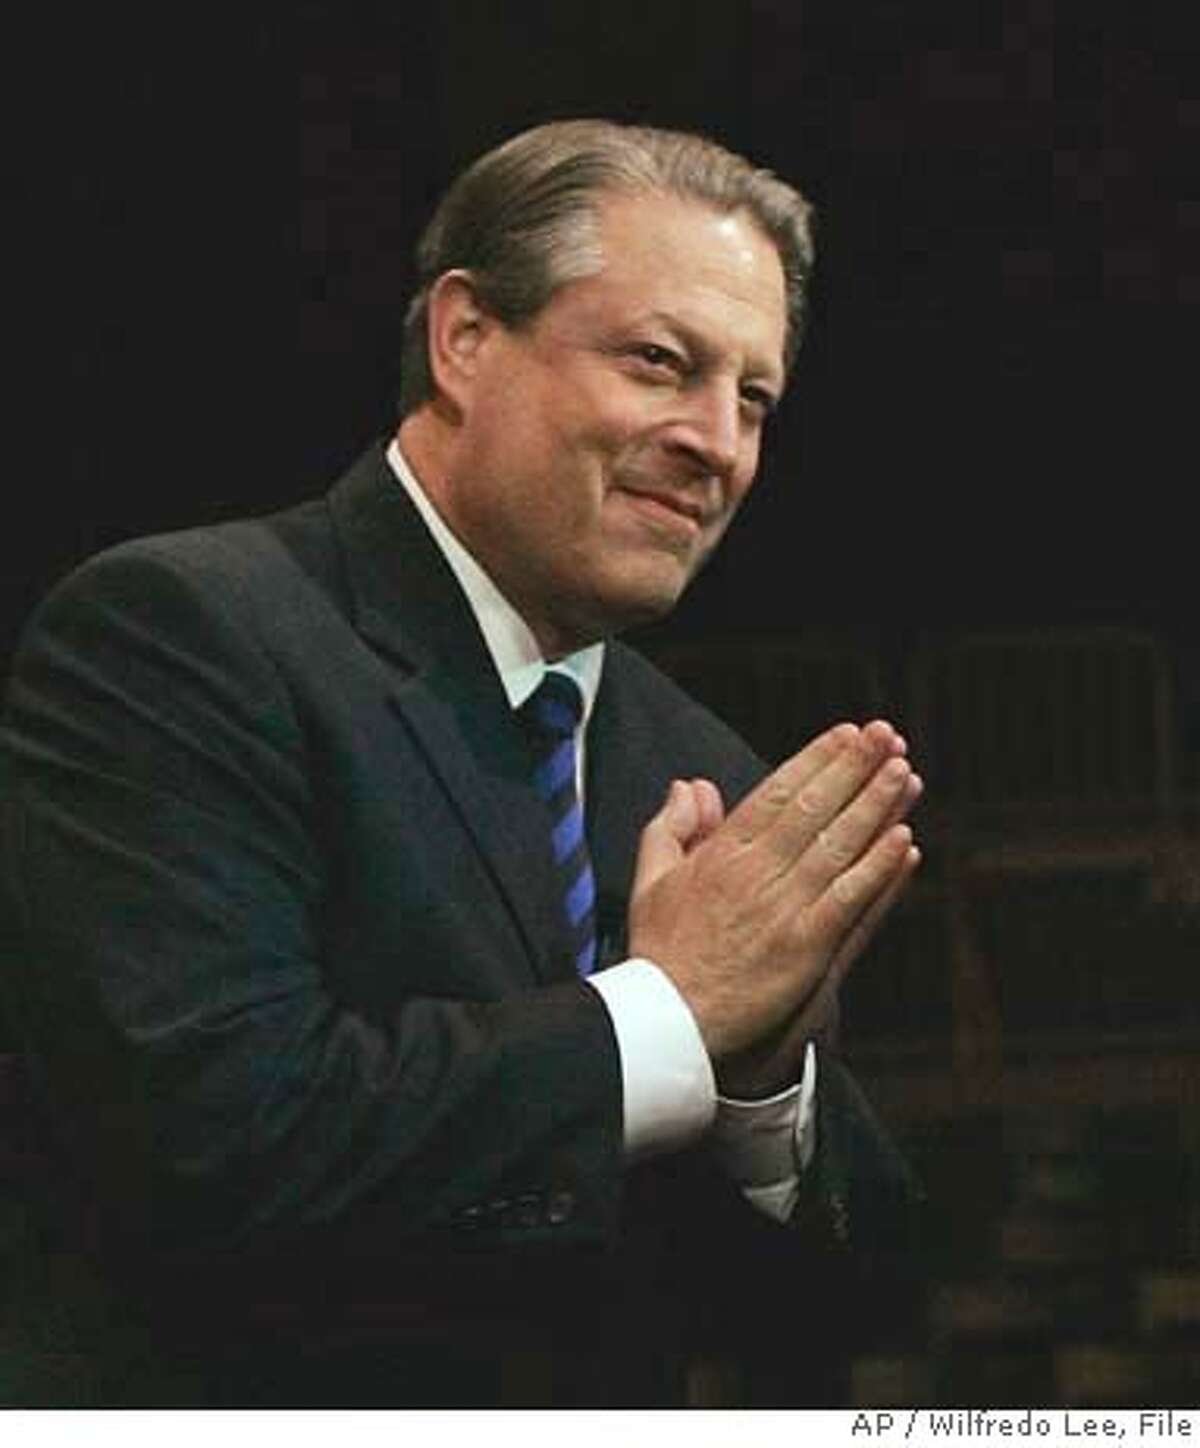 **FILE** Former Vice President Al Gore acknowledges the crowd in this file photo from Feb. 28, 2007, before giving a multimedia version of his book and Academy Award-winning documentary "An Inconvenient Truth," at the University of Miami in Coral Gables, Fla. An airline employee led the former vice president and two associates around airport security lines before police spotted the breach and required them to be screened, an airport spokeswoman said Thursday, March 1, 2007. (AP Photo/Wilfredo Lee-File) FILE PHOTO FROM FEB. 28, 2007